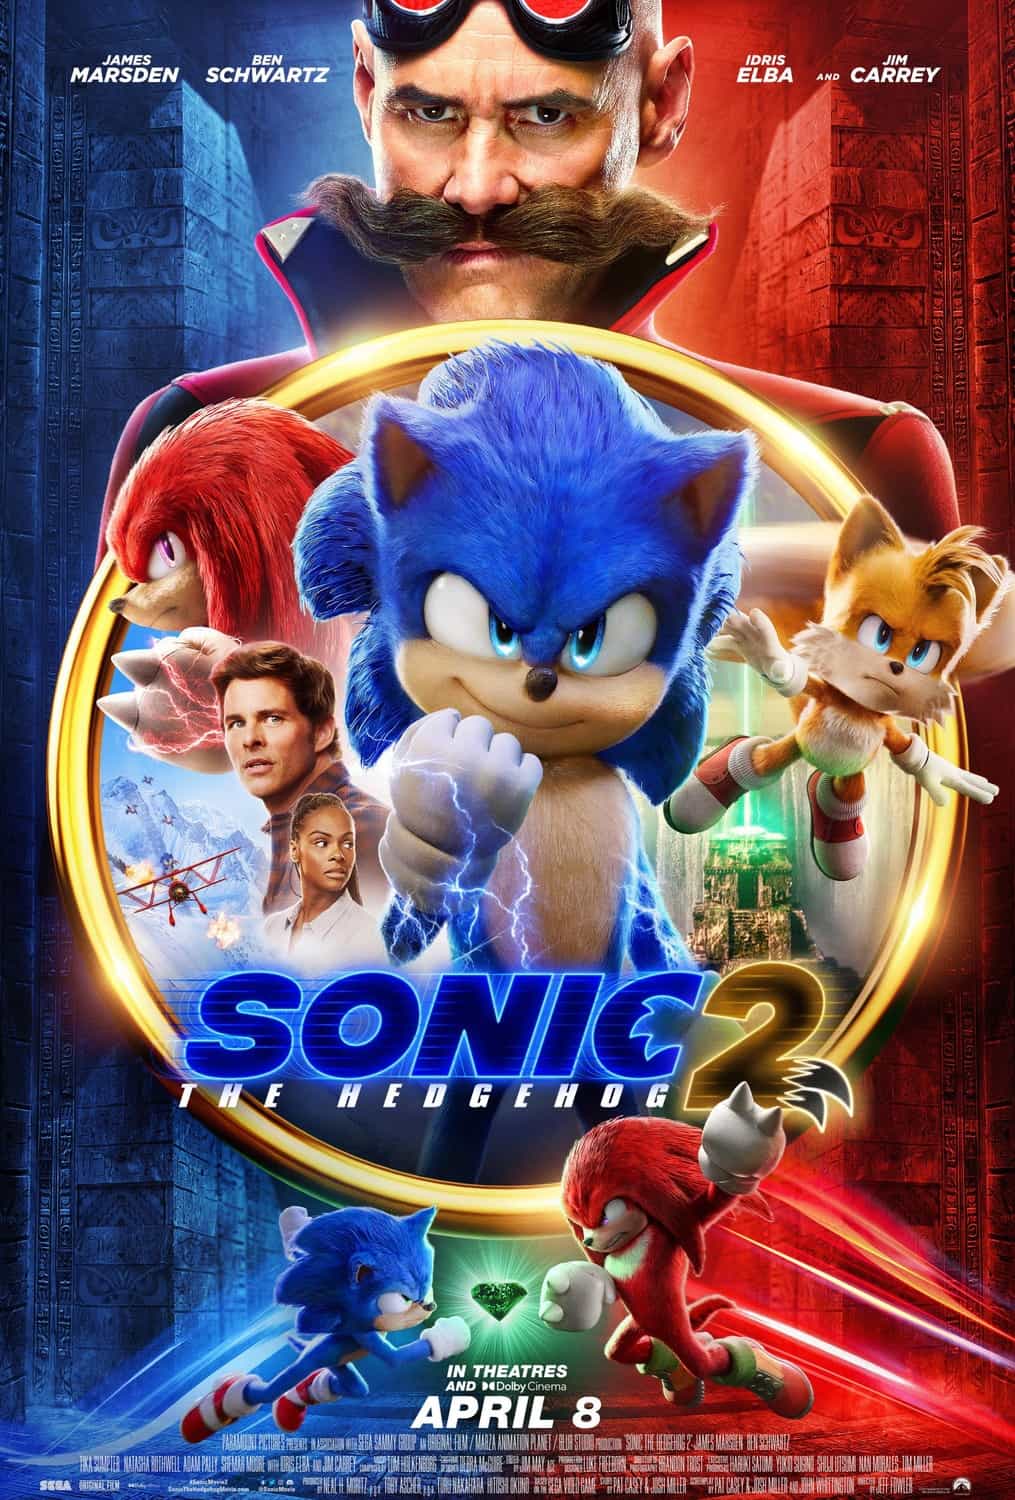 Another new poster released for Sonic the Hedgehog 2 starring Ben Schwartz - UK release date 1st April 2022 #sonicthehedgehog2